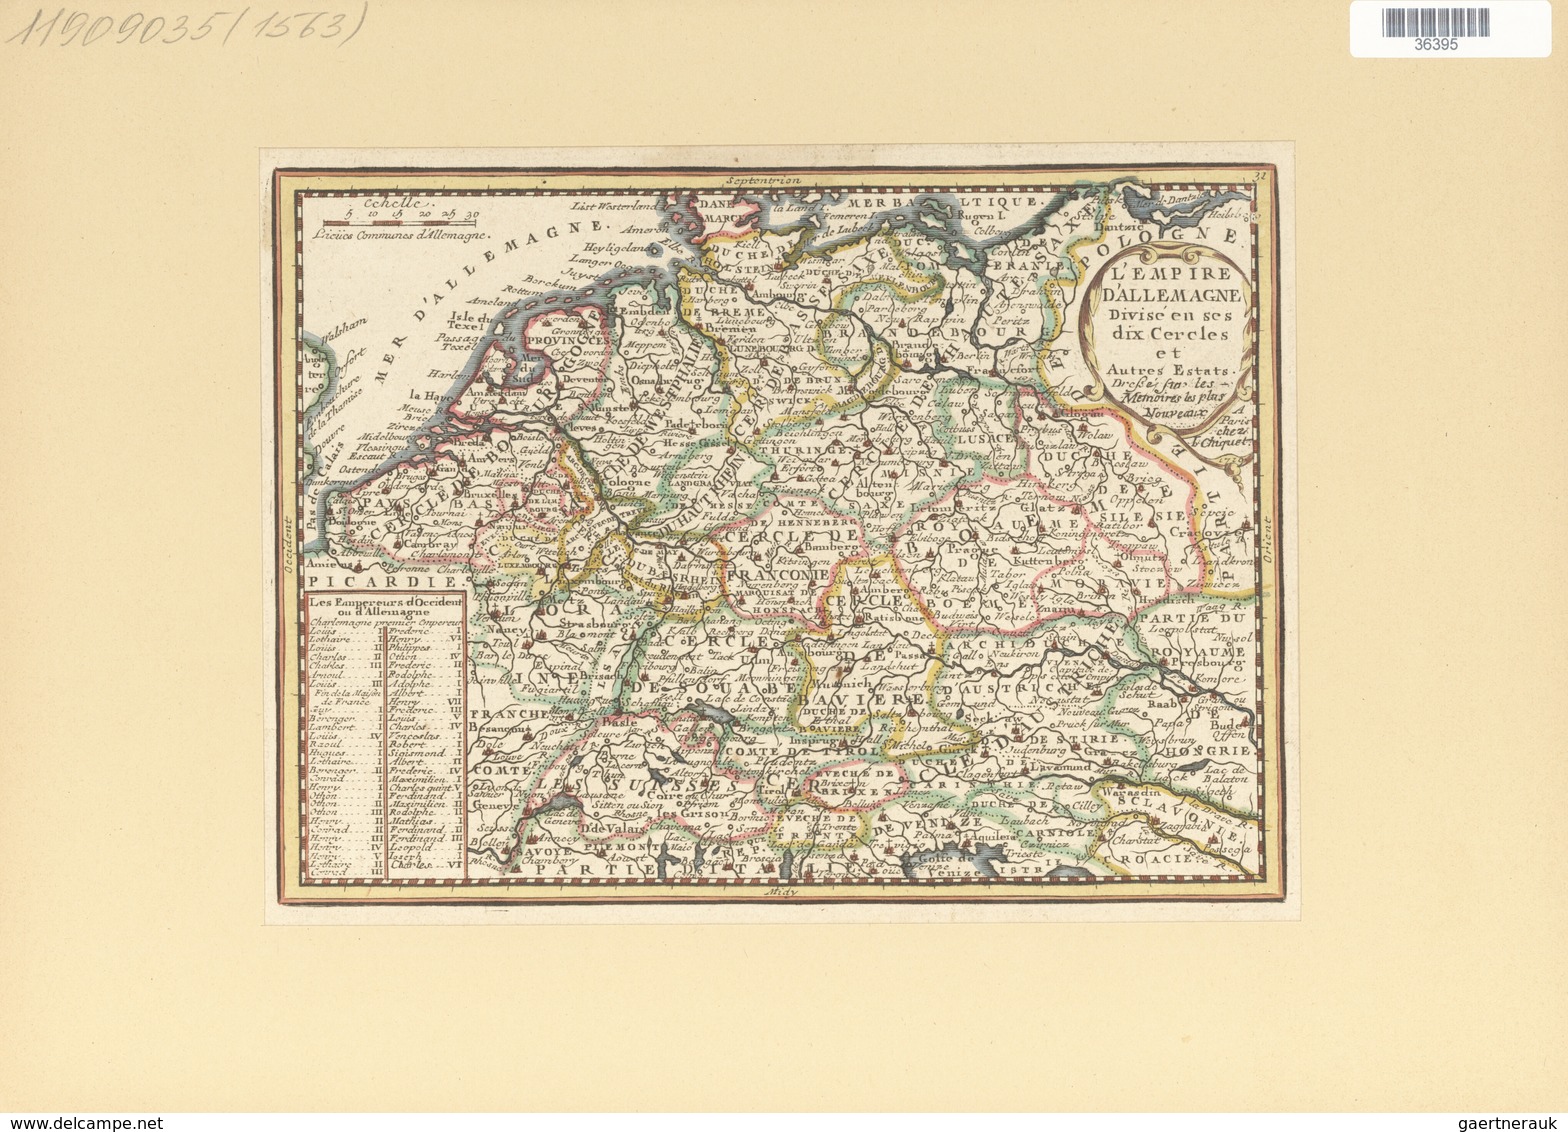 Landkarten Und Stiche: 1719. Map Of The Kingdoms Of Germania From The Low Countries To Hungary. From - Géographie